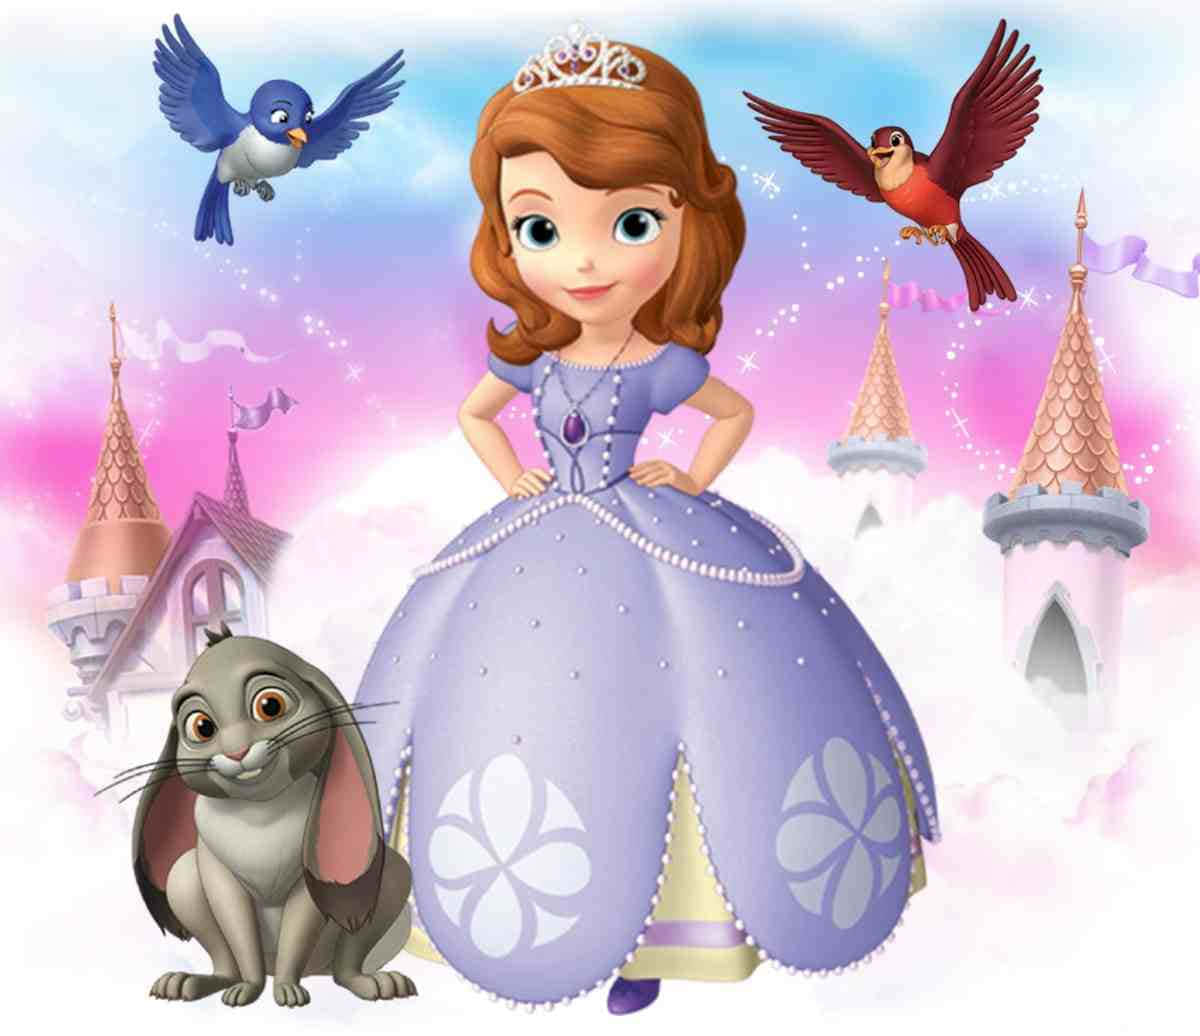 Sofia the First in her enchanting purple dress Wallpaper